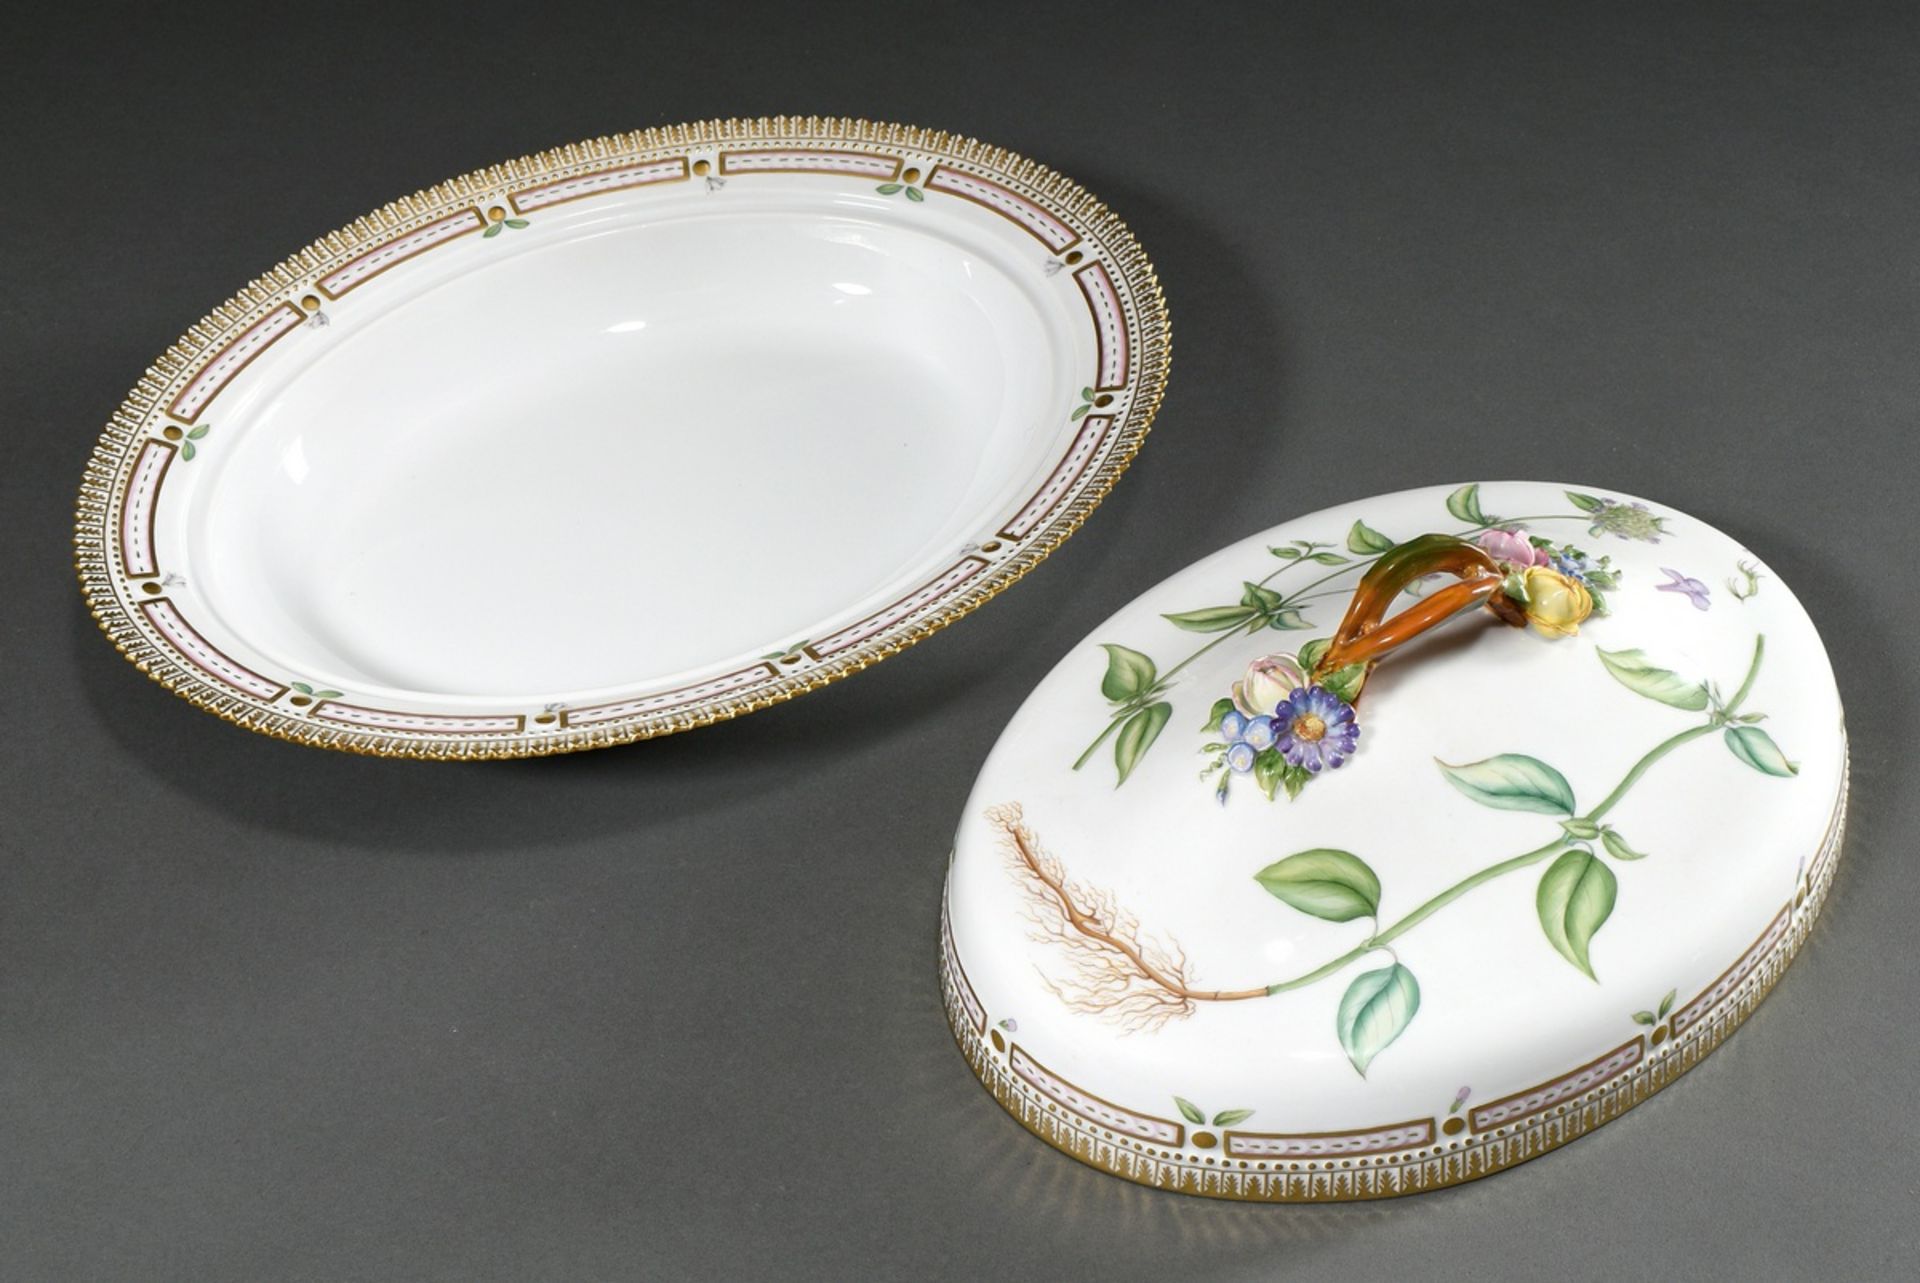 Large oval Royal Copenhagen "Flora Danica" tureen with polychrome painting, branch handles, applied - Image 4 of 7